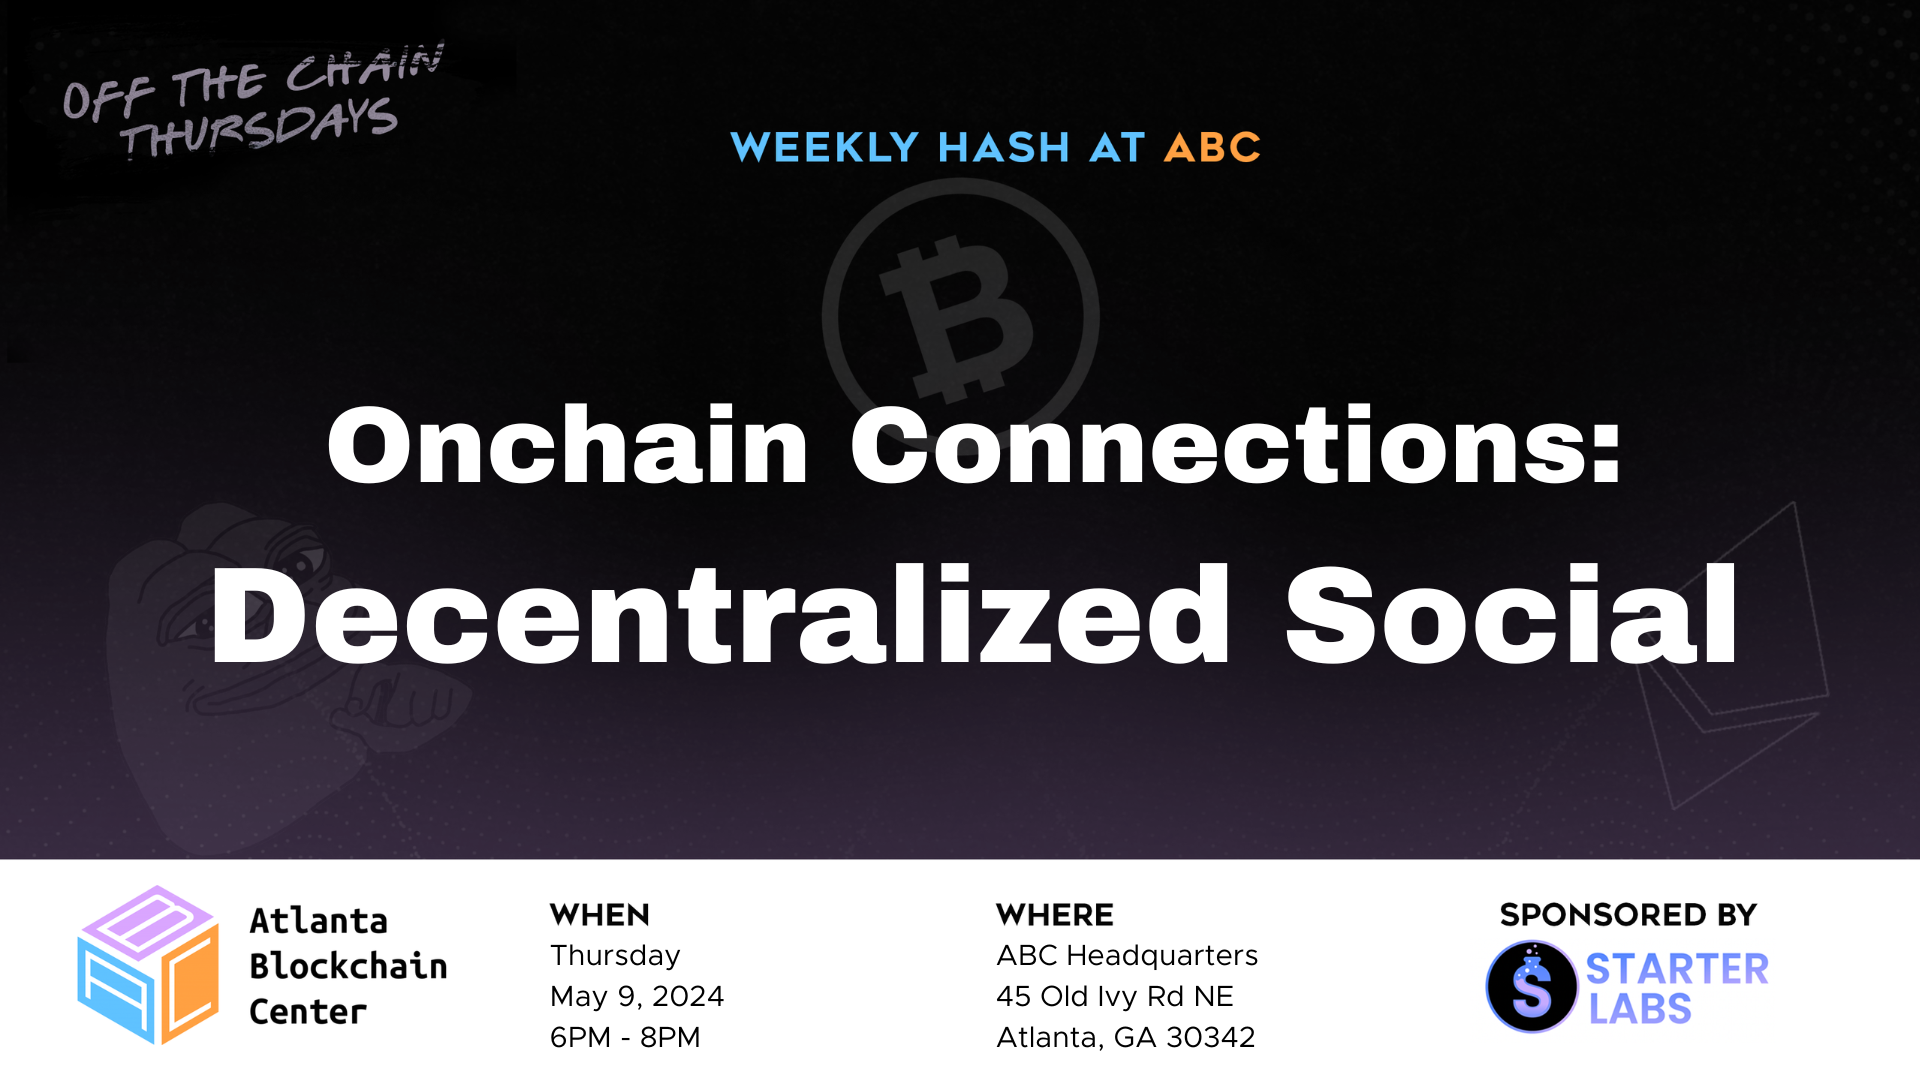 Onchain Connections: Decentralized Social